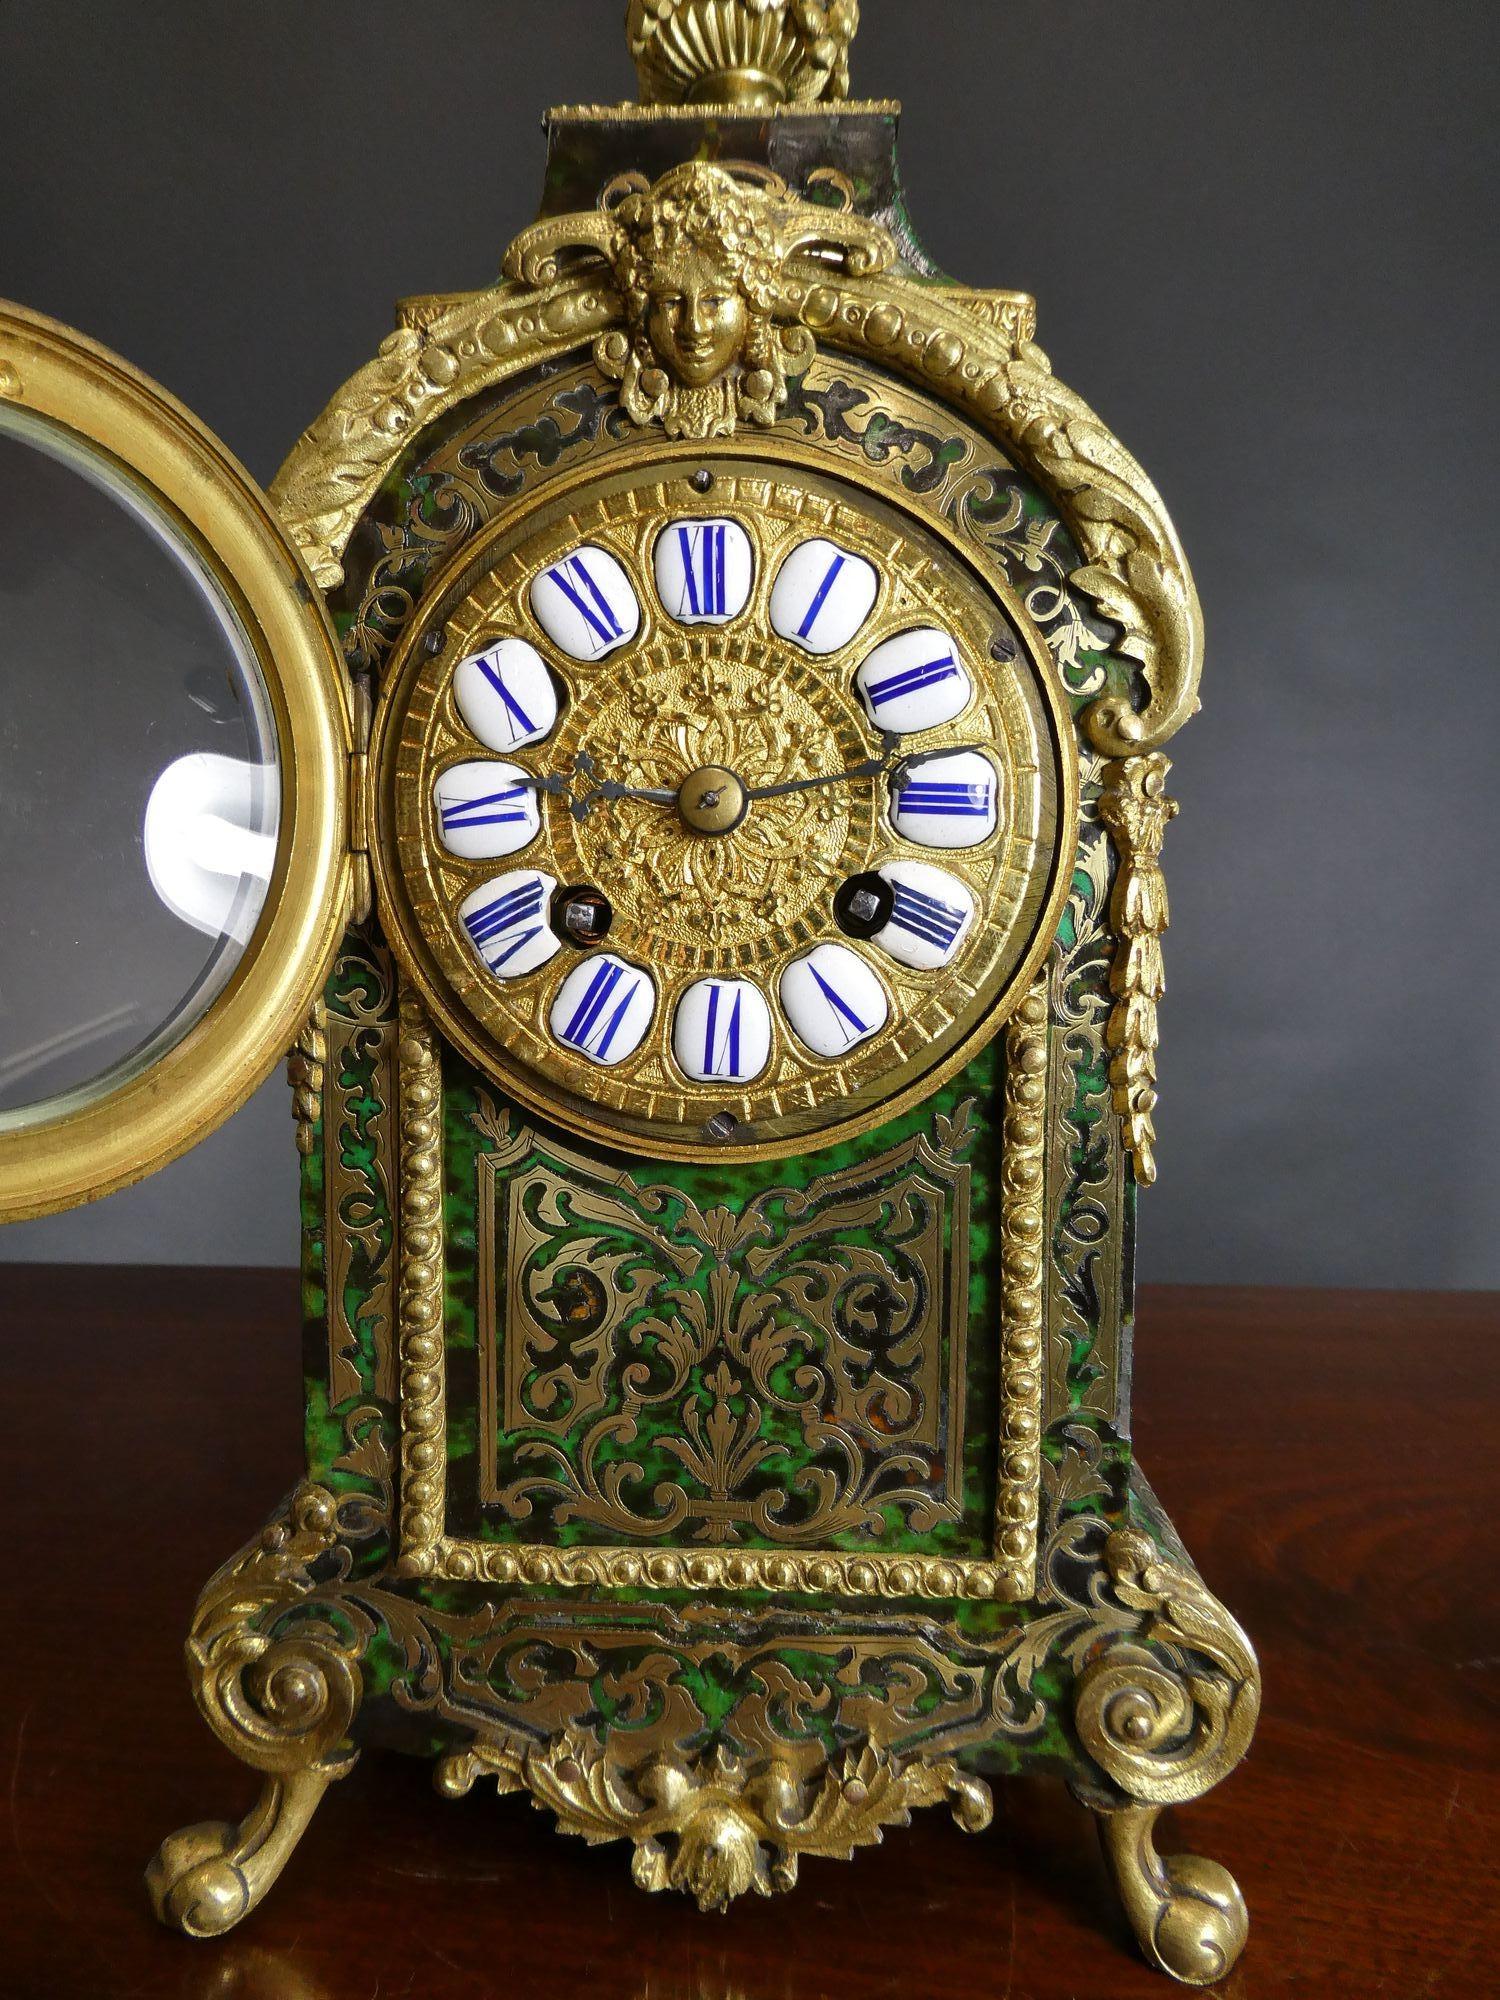 Fine French Tortoiseshell Boulle Clock
Straight sided case with green ‘tortoiseshell’ inlaid with fine brass decoration surmounted by an ormolu finial, ormolu mounts throughout and standing on raised bracket feet. 
Gilded and chased dial with